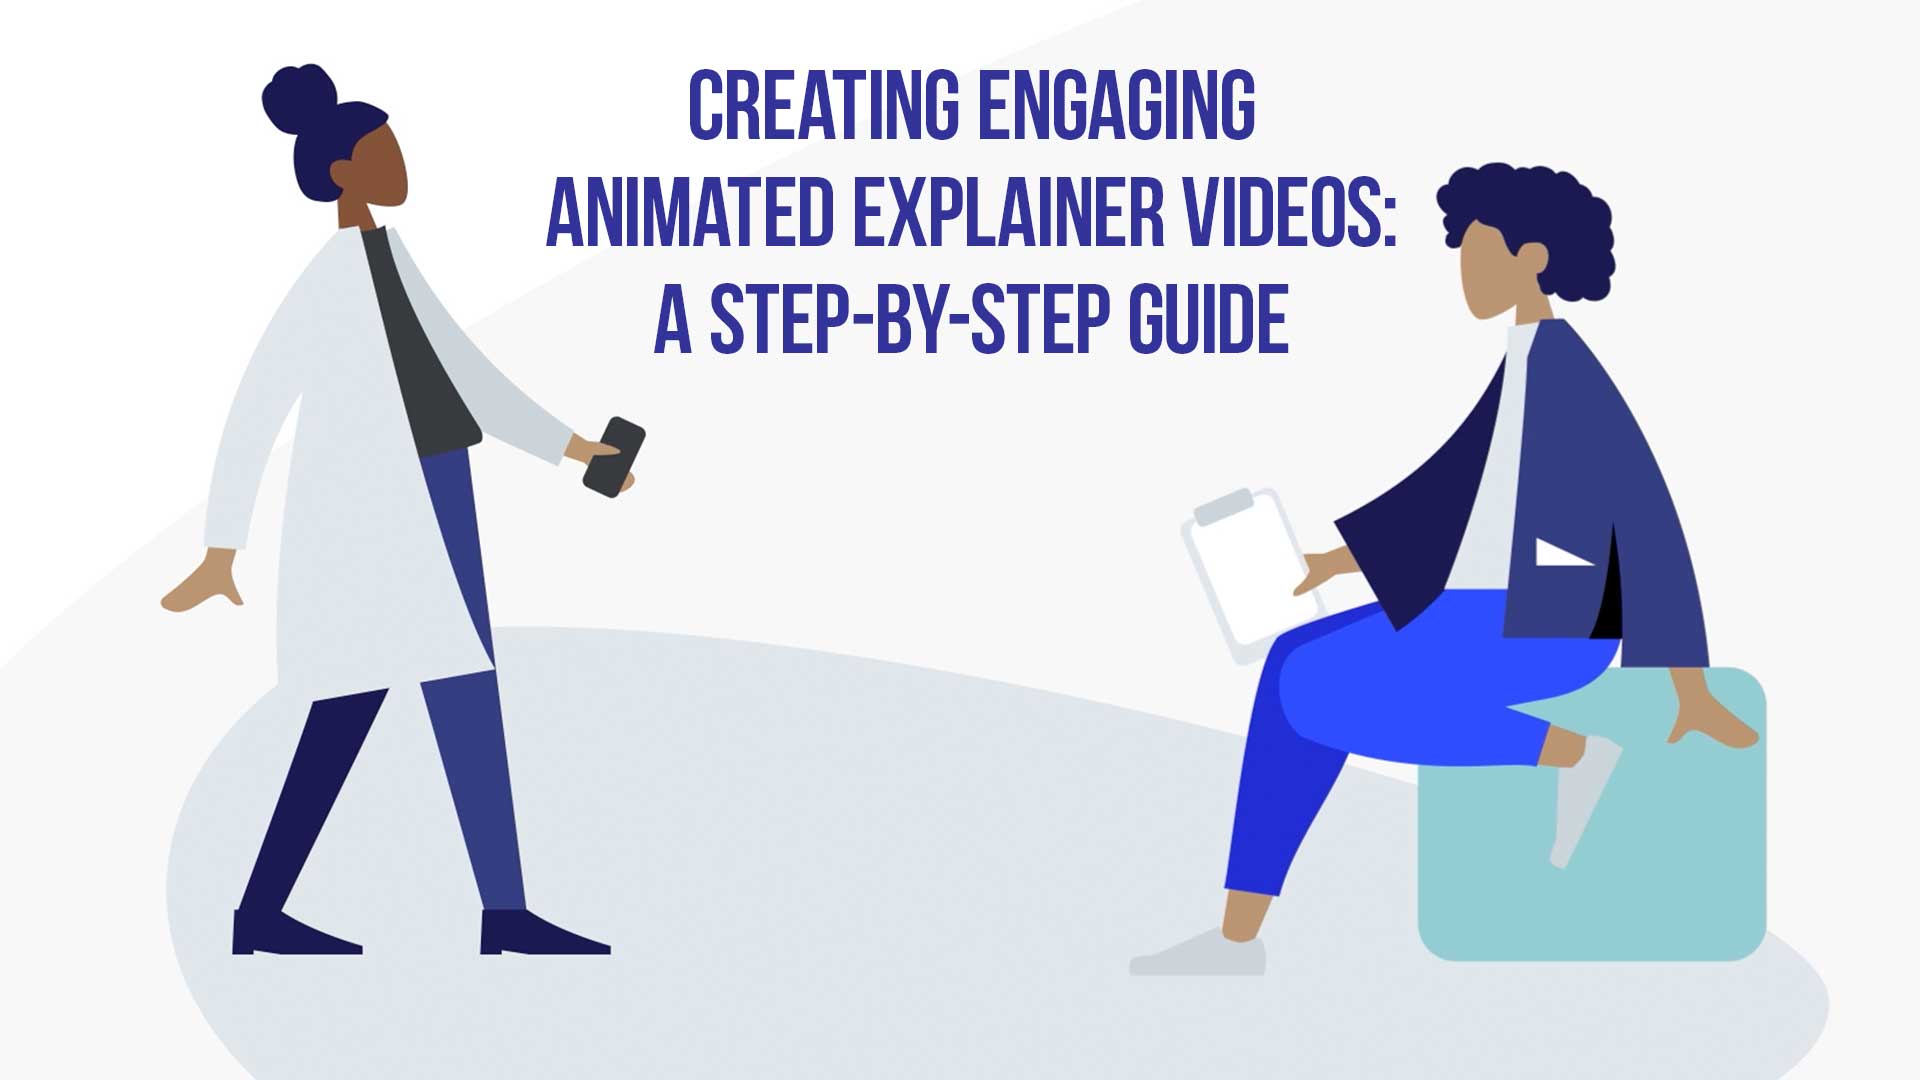 Creating Engaging Animated Explainer Videos: A Step-by-Step Guide